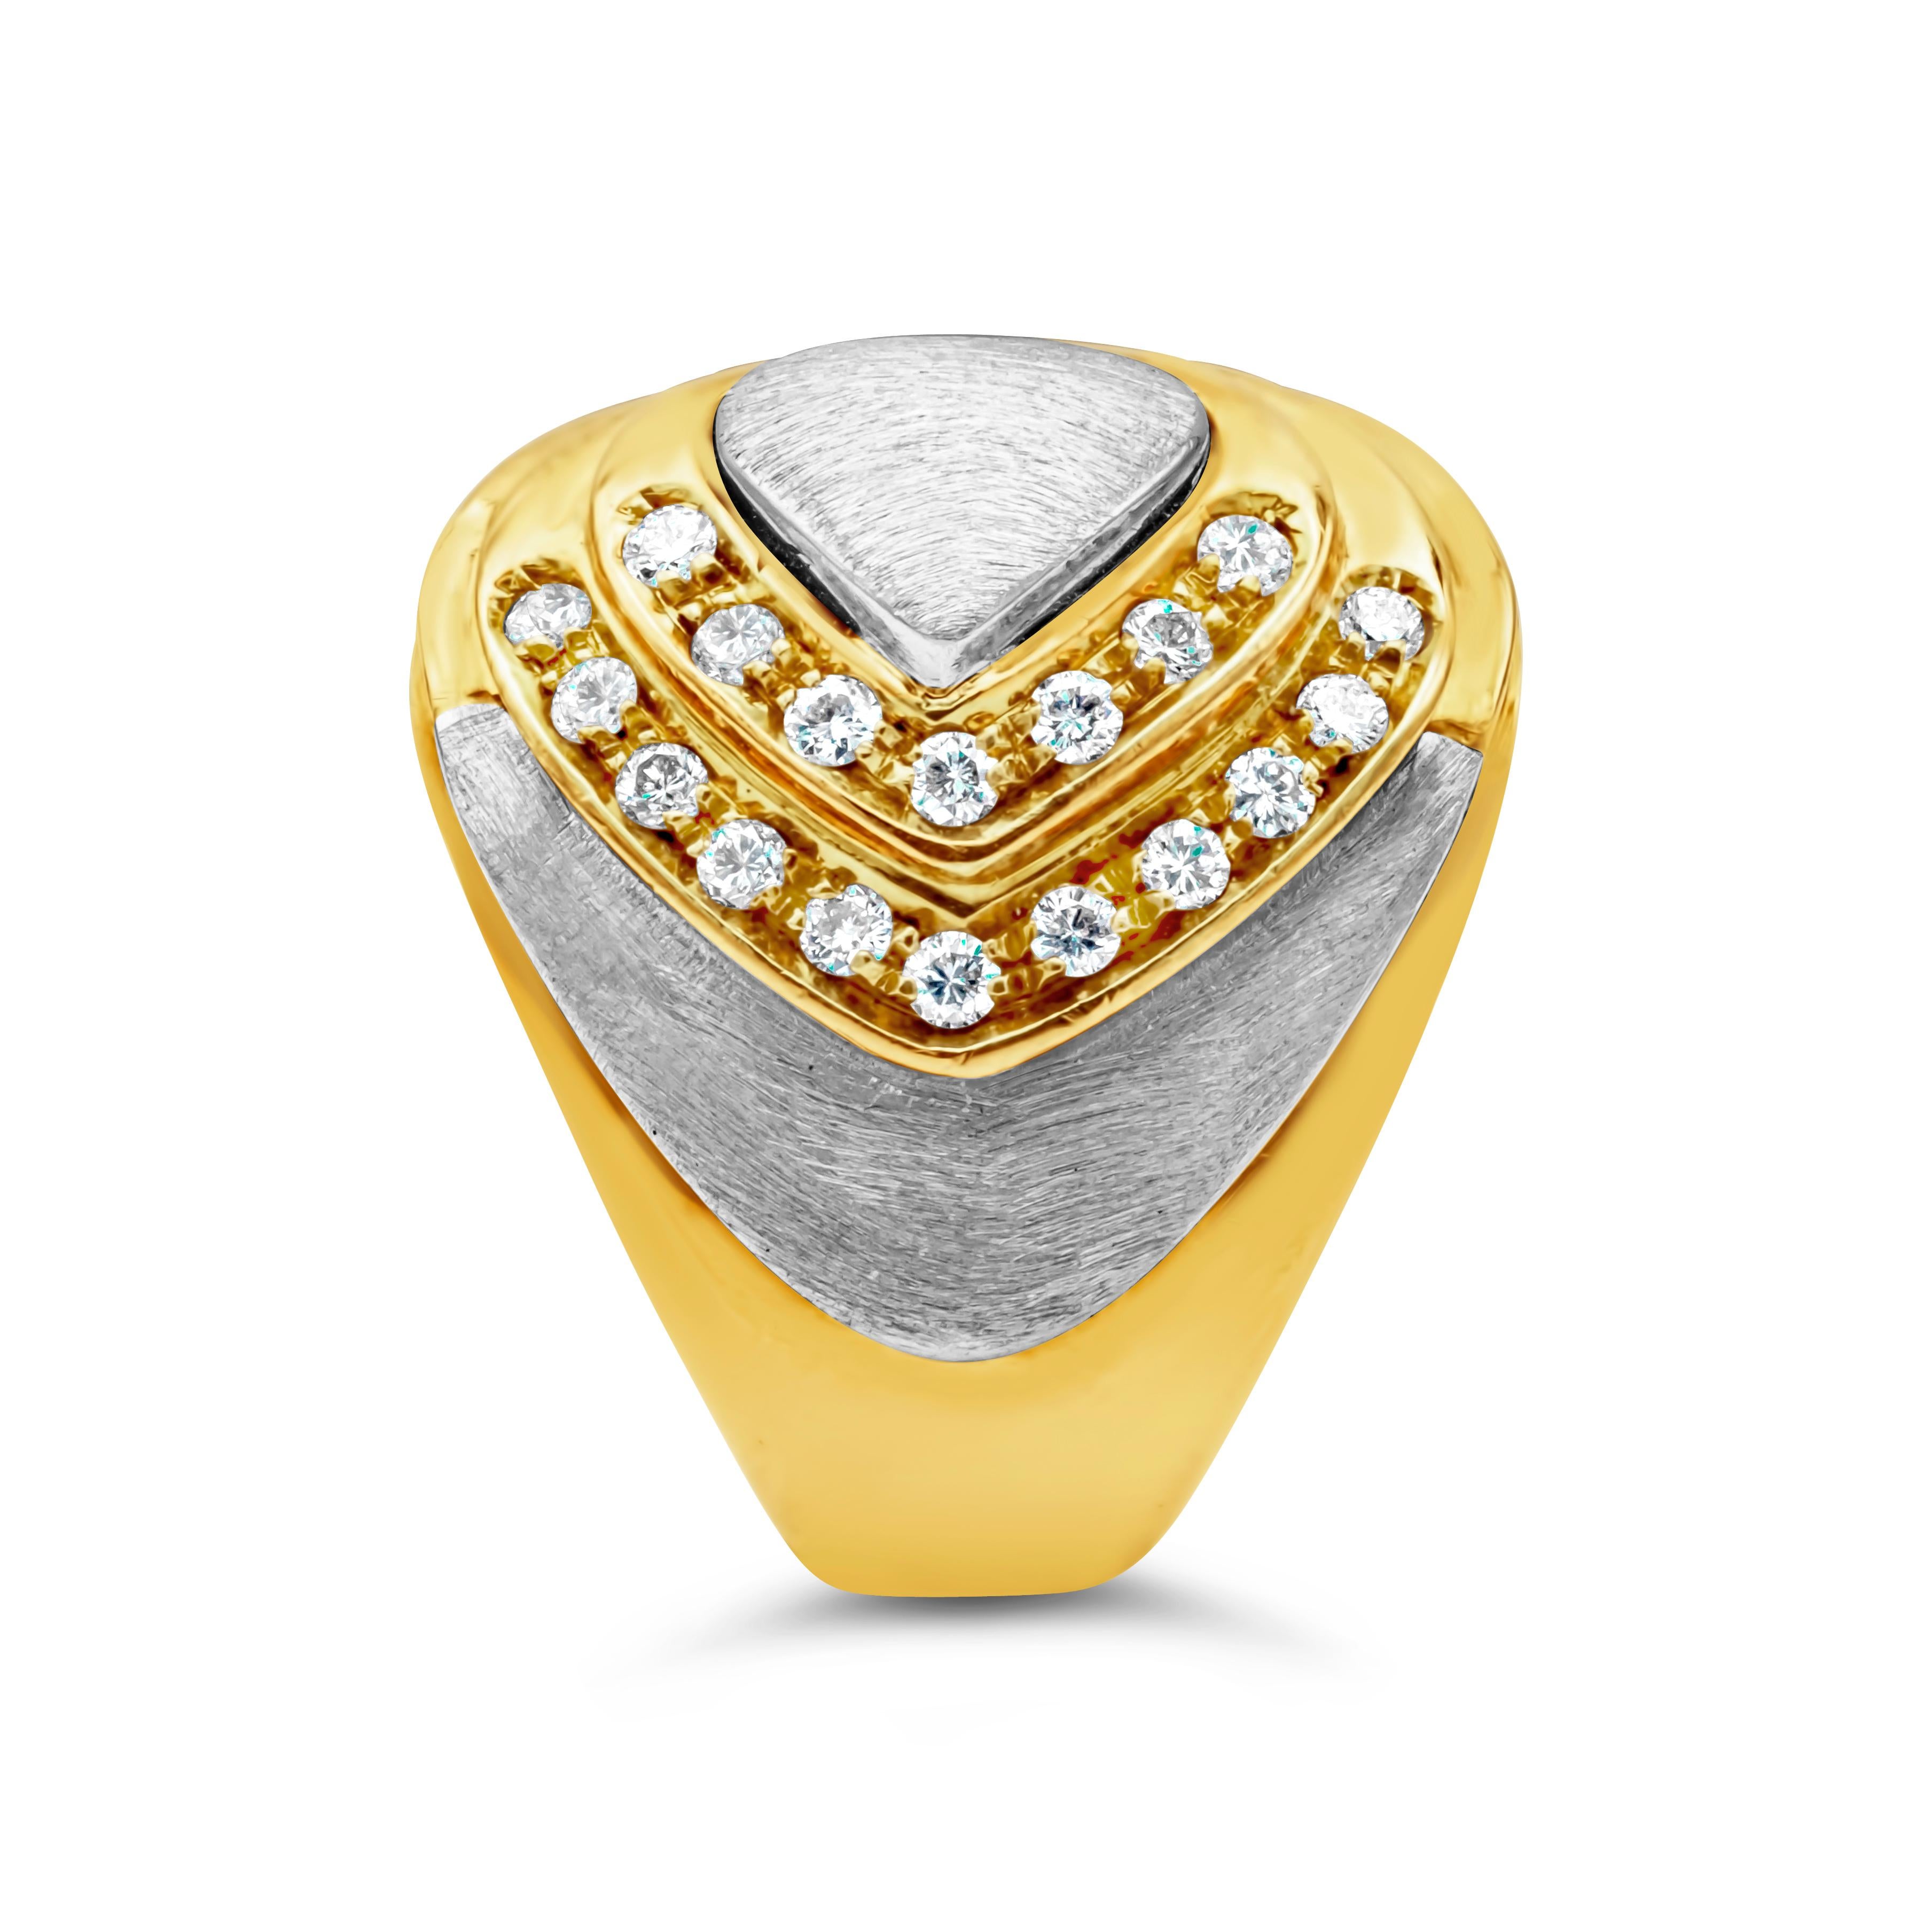 0.27 Carat Total Brilliant Round Diamond Retro Fashion Ring in 18 Karat Two-Tone In Excellent Condition For Sale In New York, NY